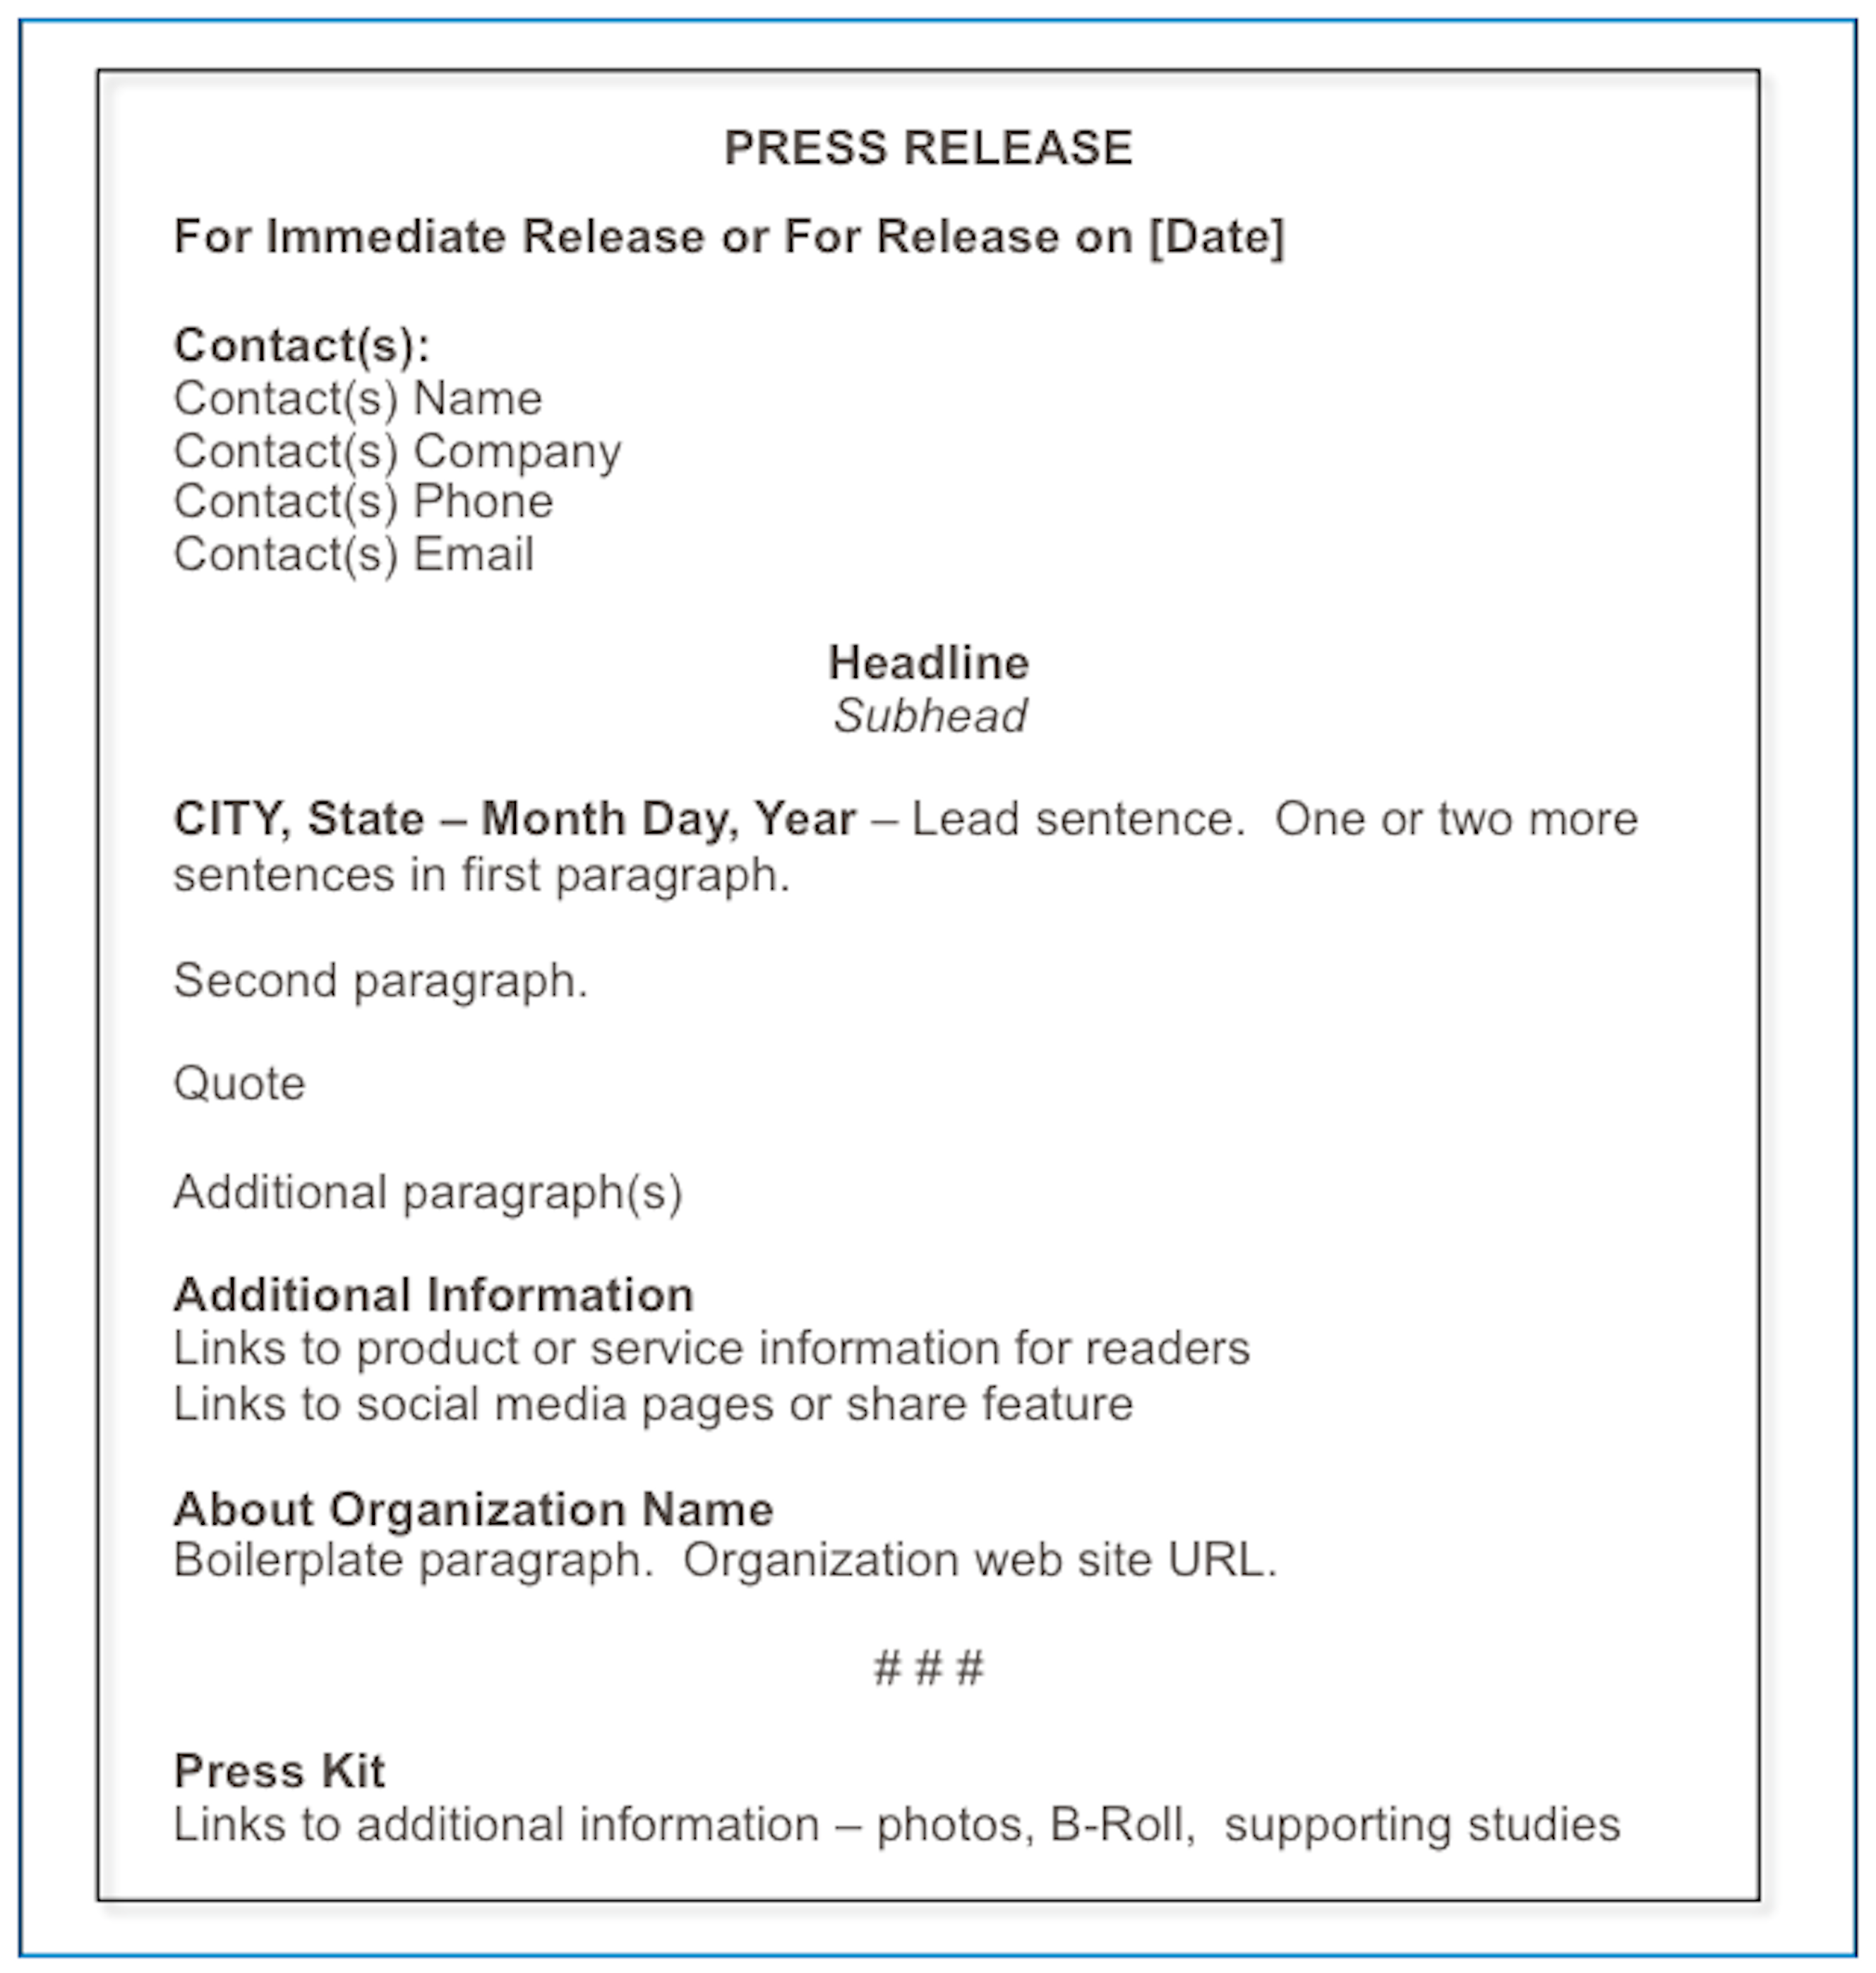 Press Release Format, Instructions & Easy To Use Template